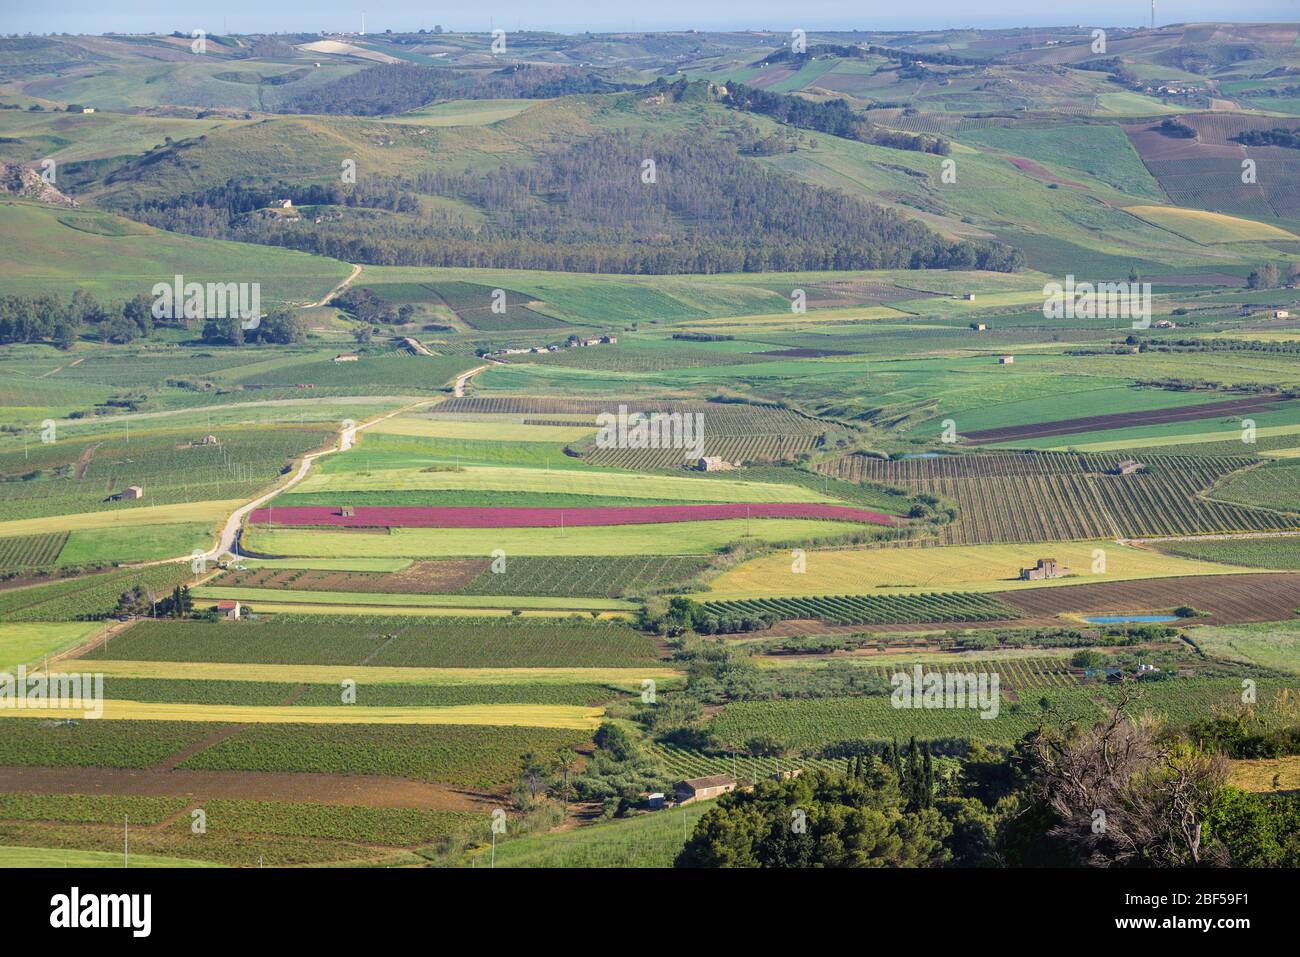 Patchwork of fields and vineyards in Belice valley seen from Salemi town located in the province of Trapani in southwestern Sicily, Italy Stock Photo